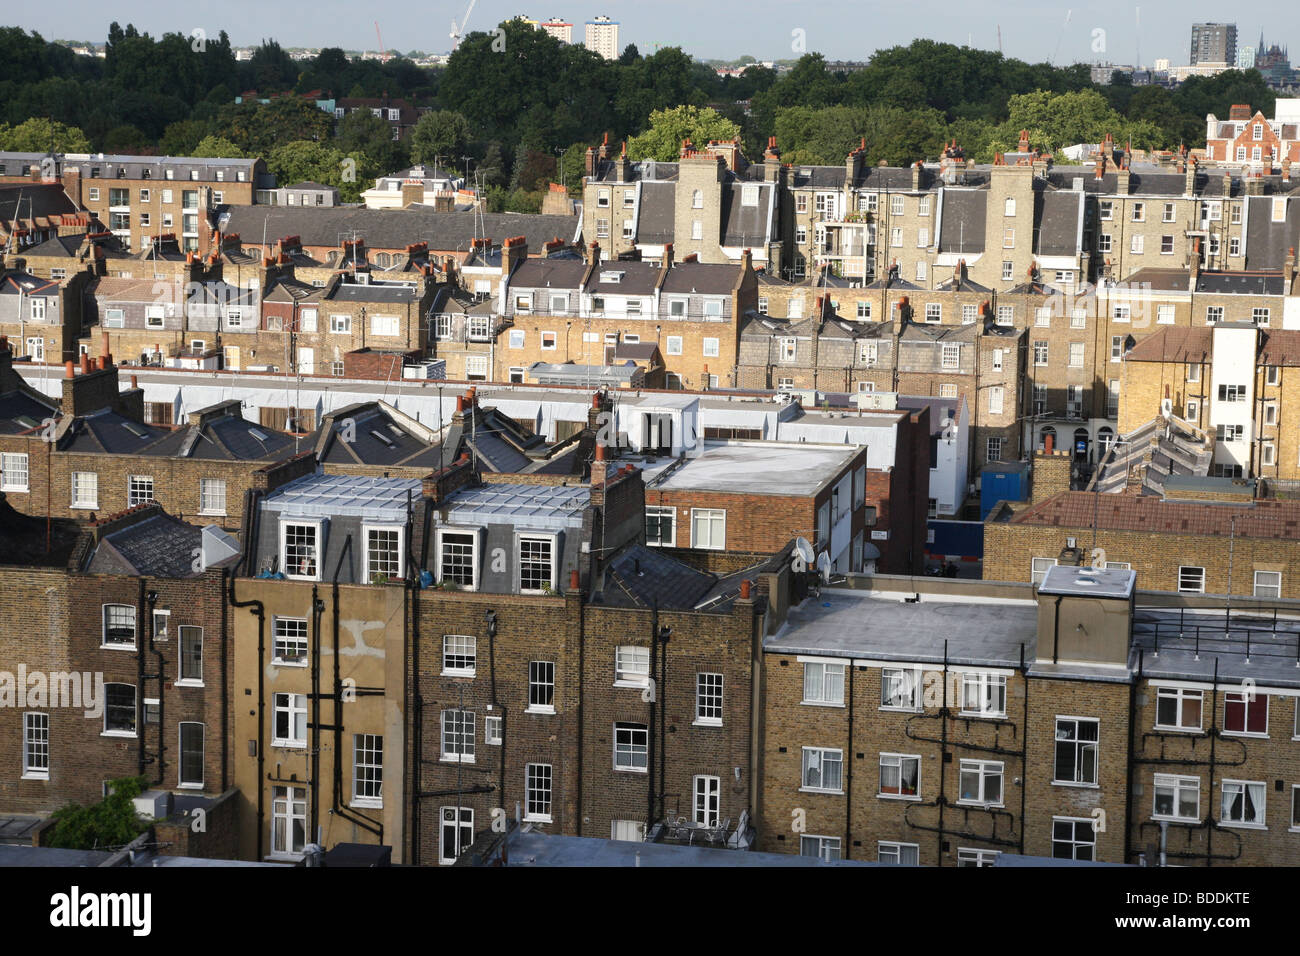 Aeriel view of housing in London east of Marylebone Station with Regents Park in the background Stock Photo